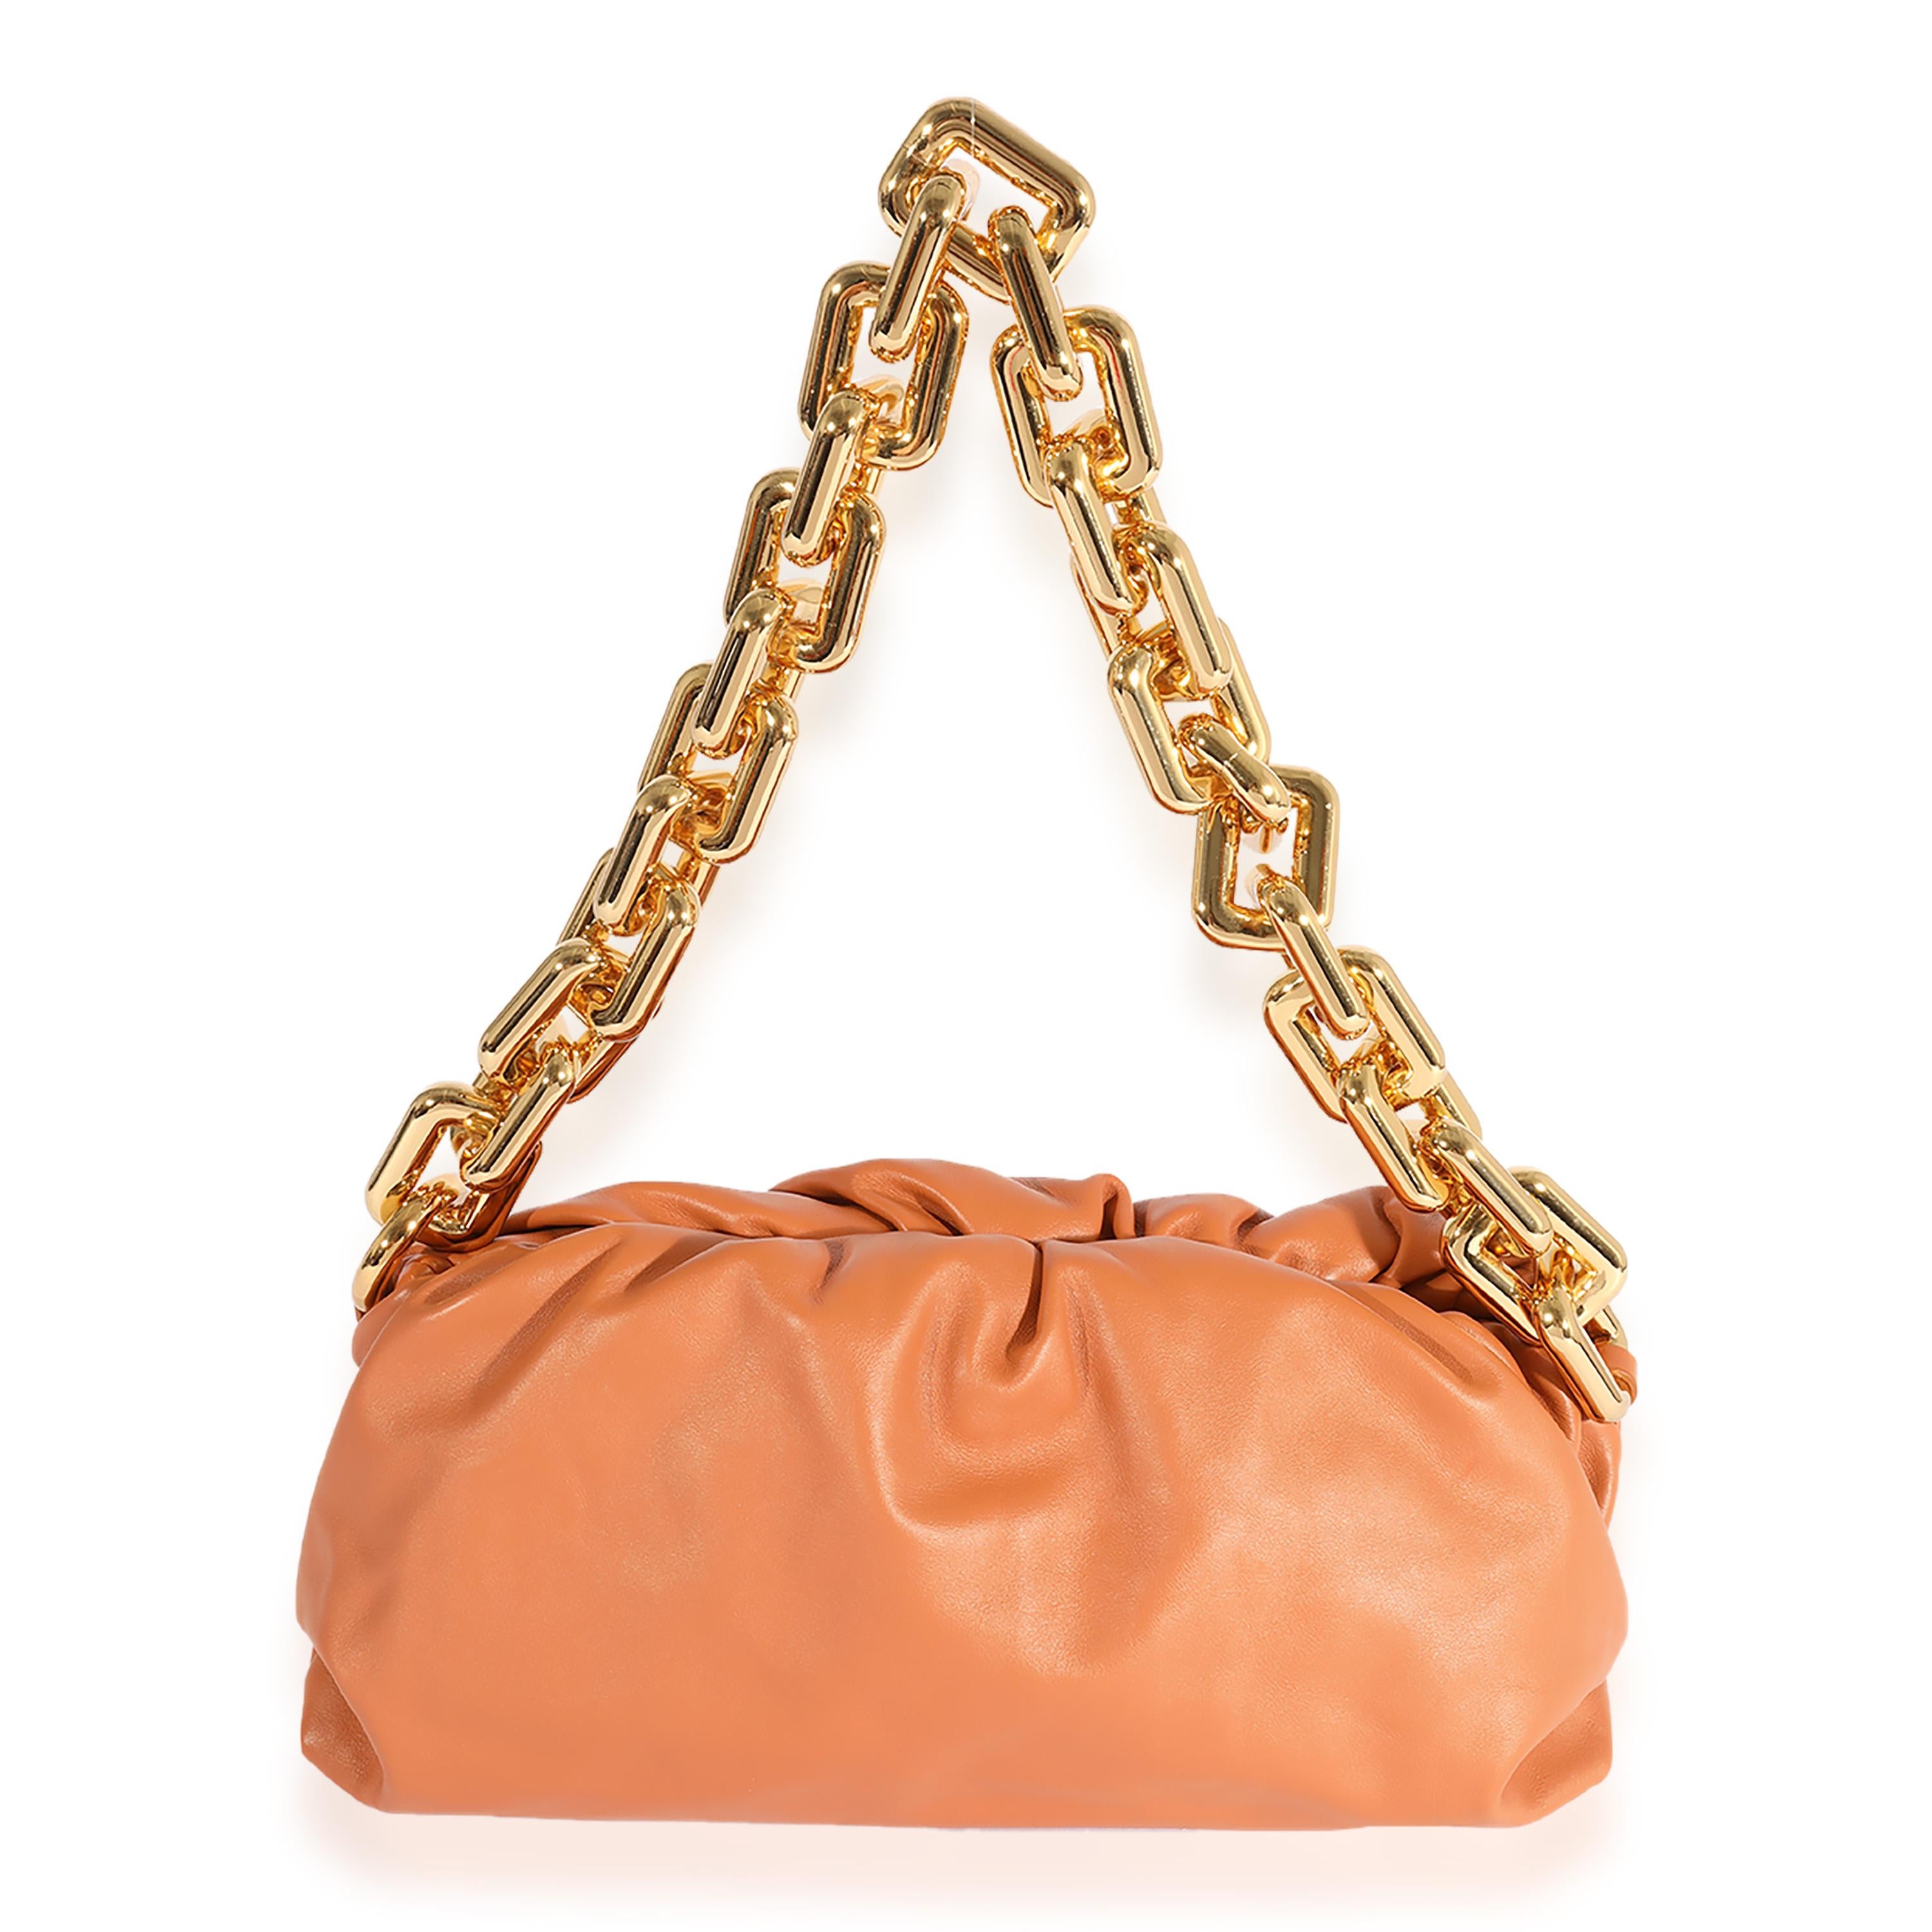 Listing Title: Bottega Veneta Clay Calfskin Chain Pouch
SKU: 123398
MSRP: 4100.00
Condition: Pre-owned 
Handbag Condition: Excellent
Condition Comments: Excellent Condition. Faint interior scuffing. No other visible signs of wear.
Brand: Bottega